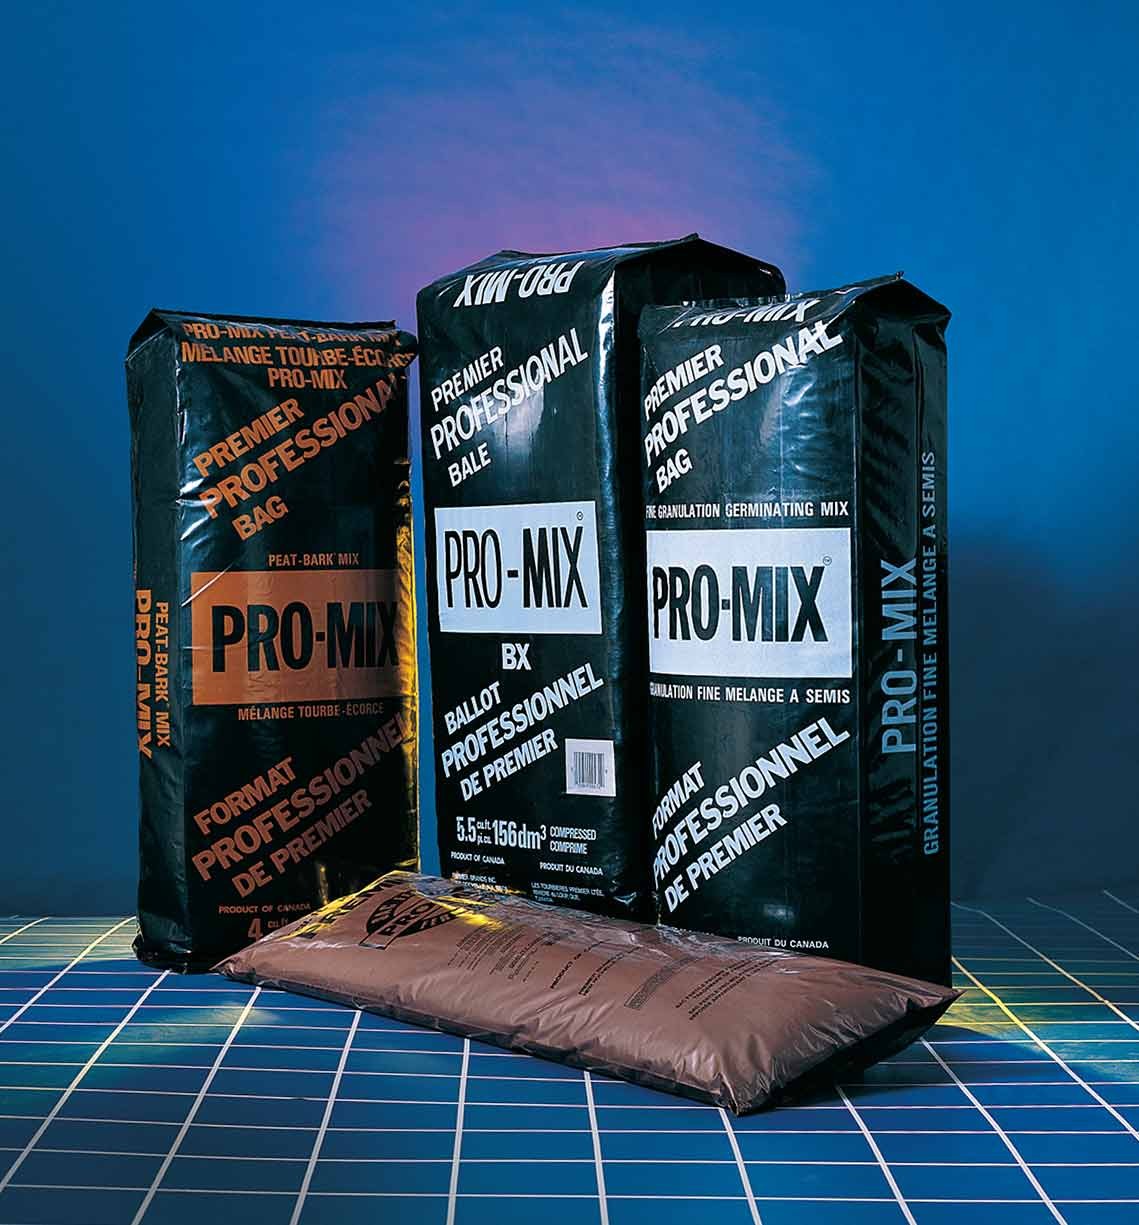 The PRO-MIX brand is launched in 1968